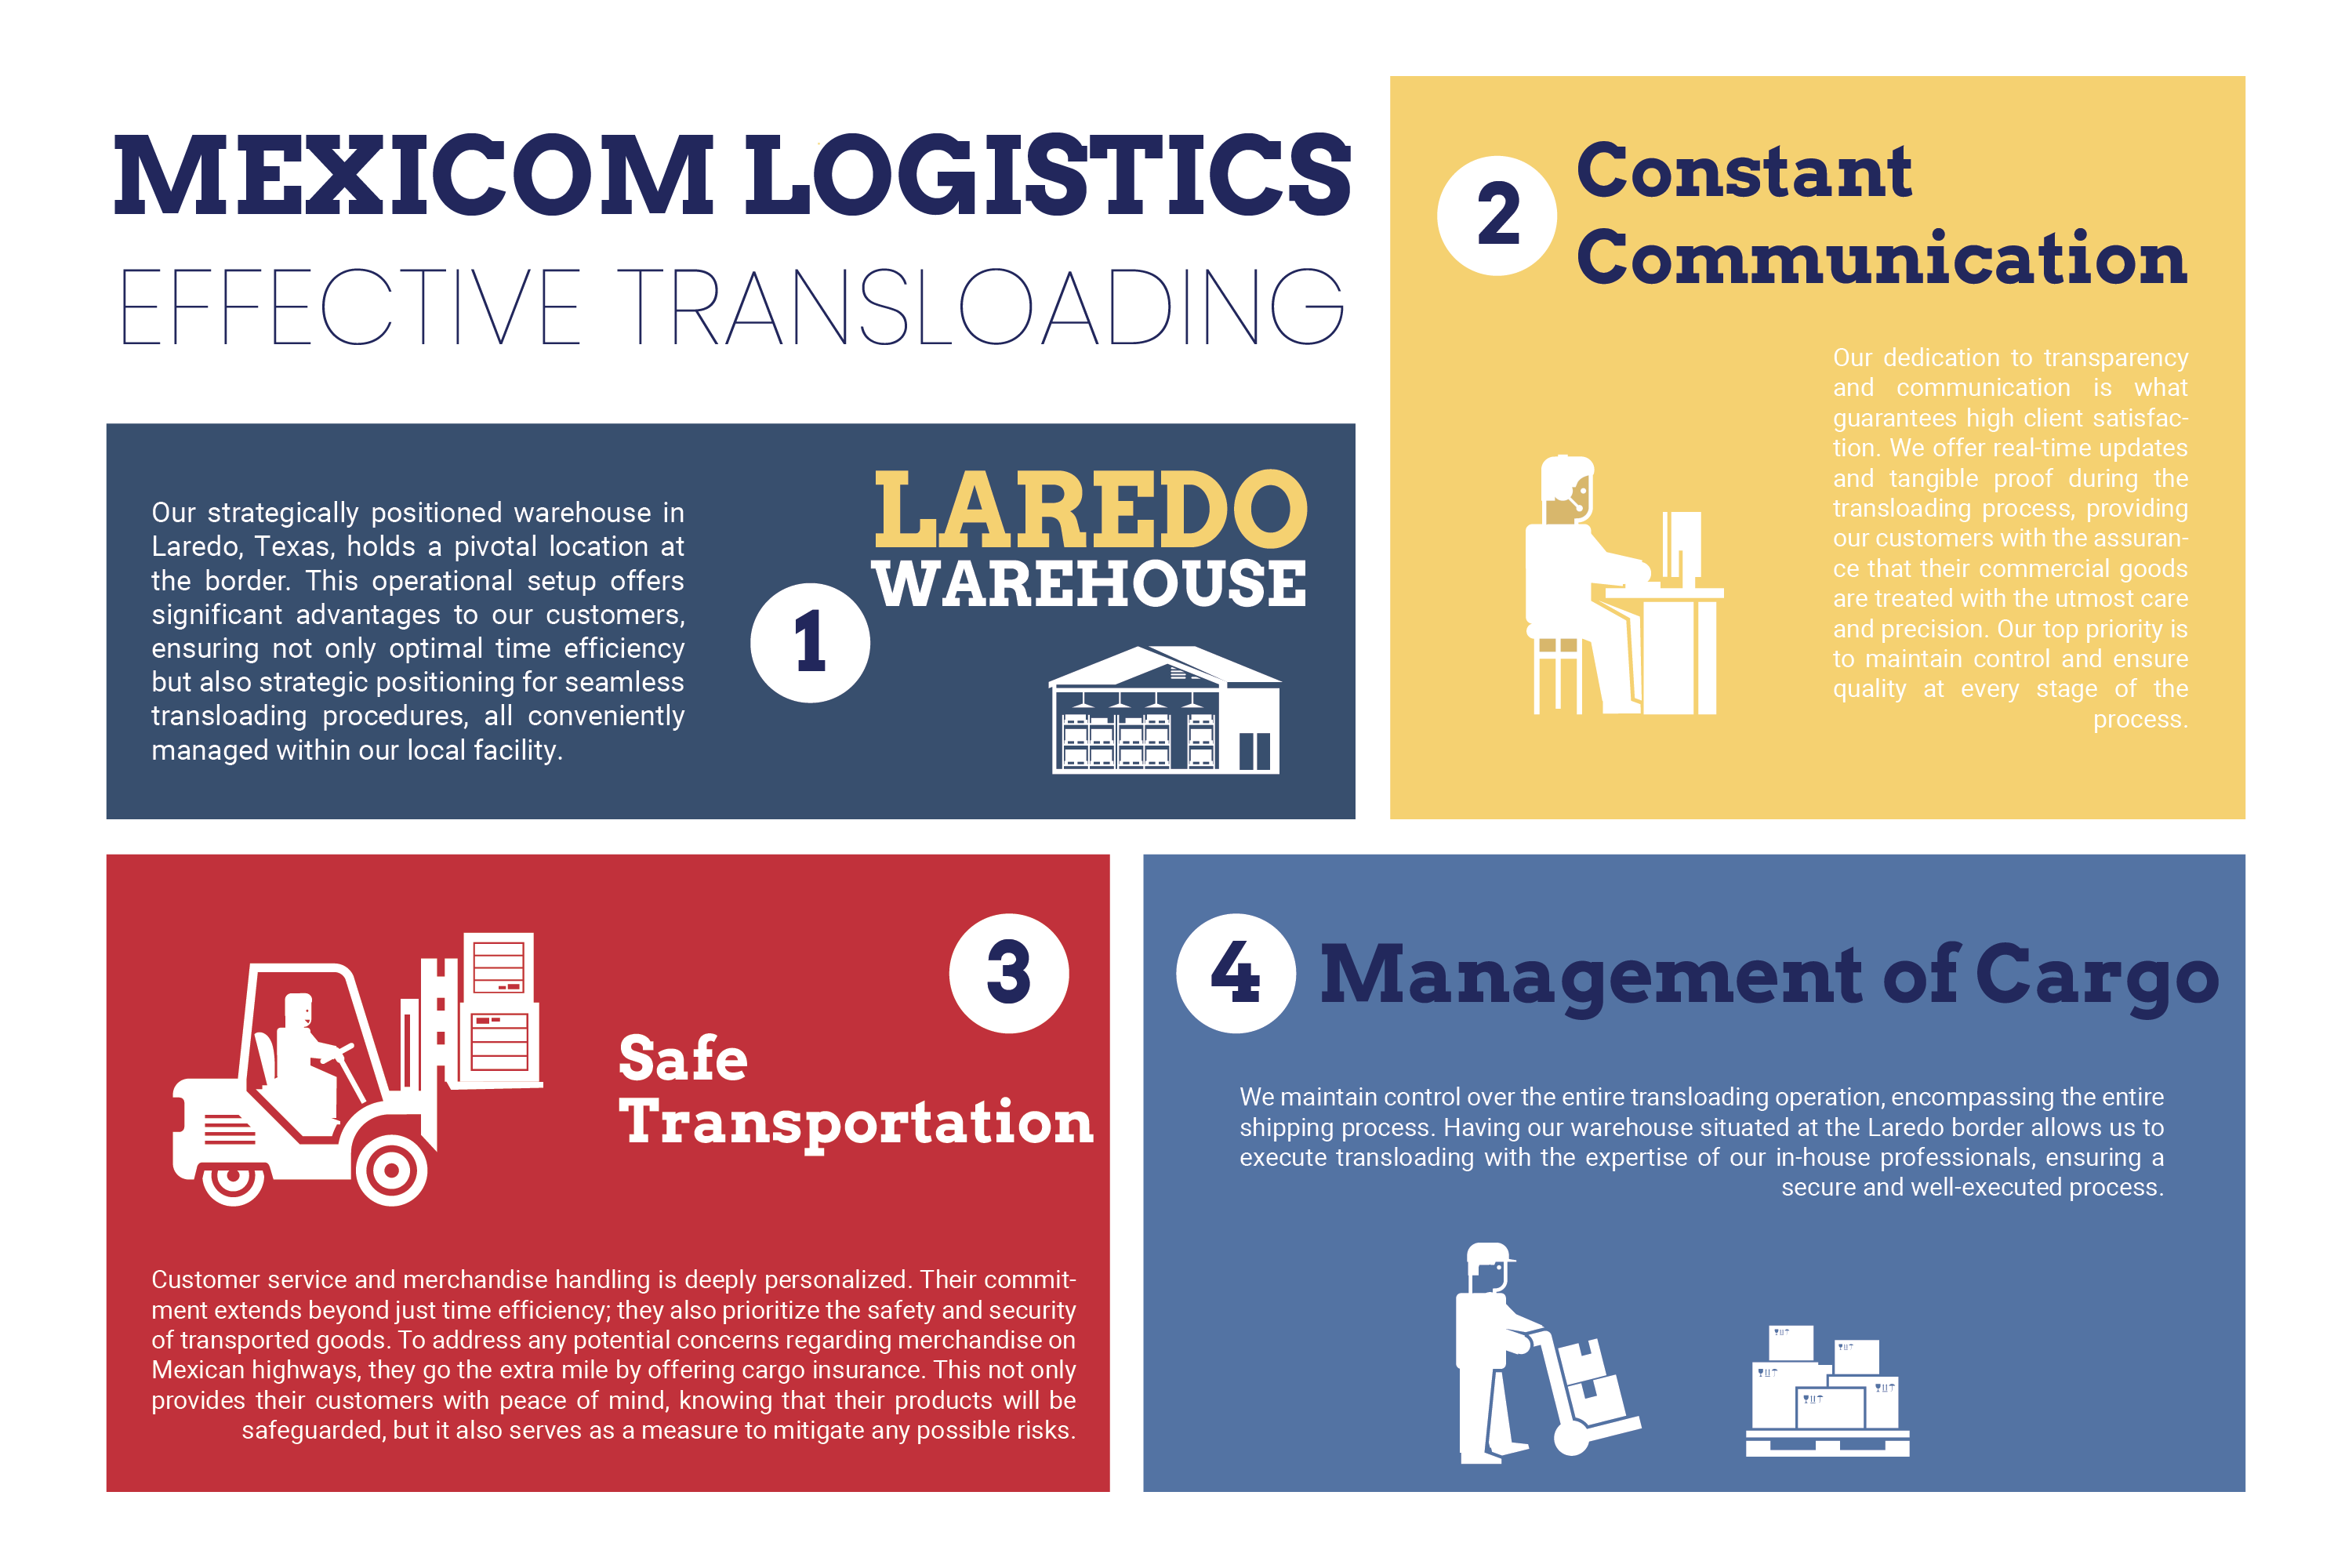 effective transloading by mexicom logistics that betters services in the mexico - us border